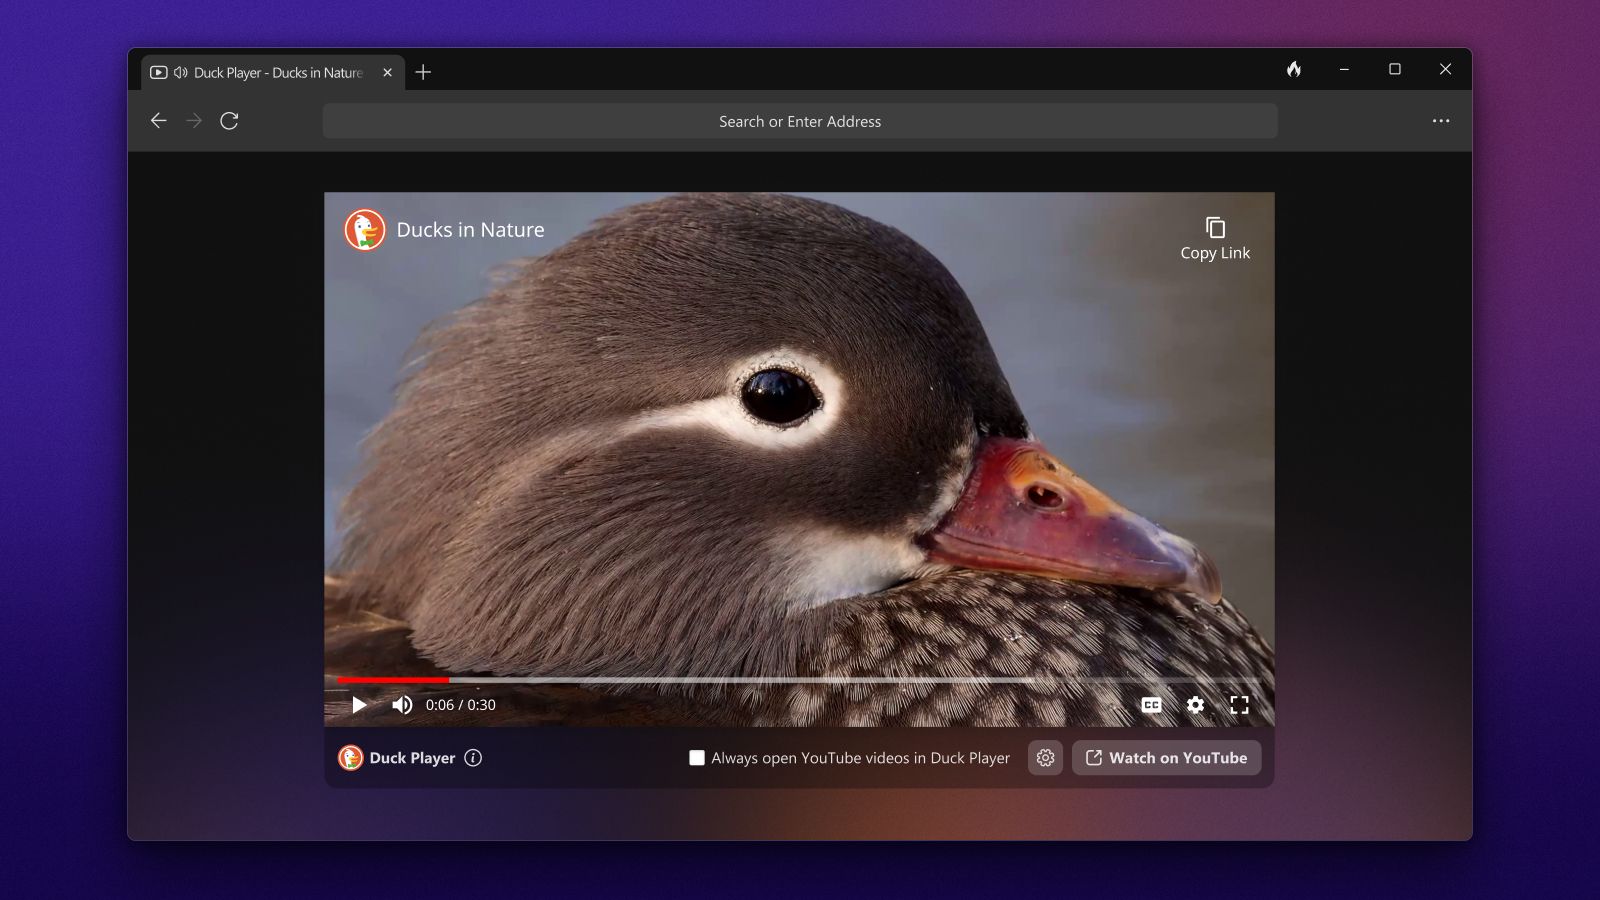 The Duck Player feature of DuckDuckGo's Windows web browser, showing a video being played.